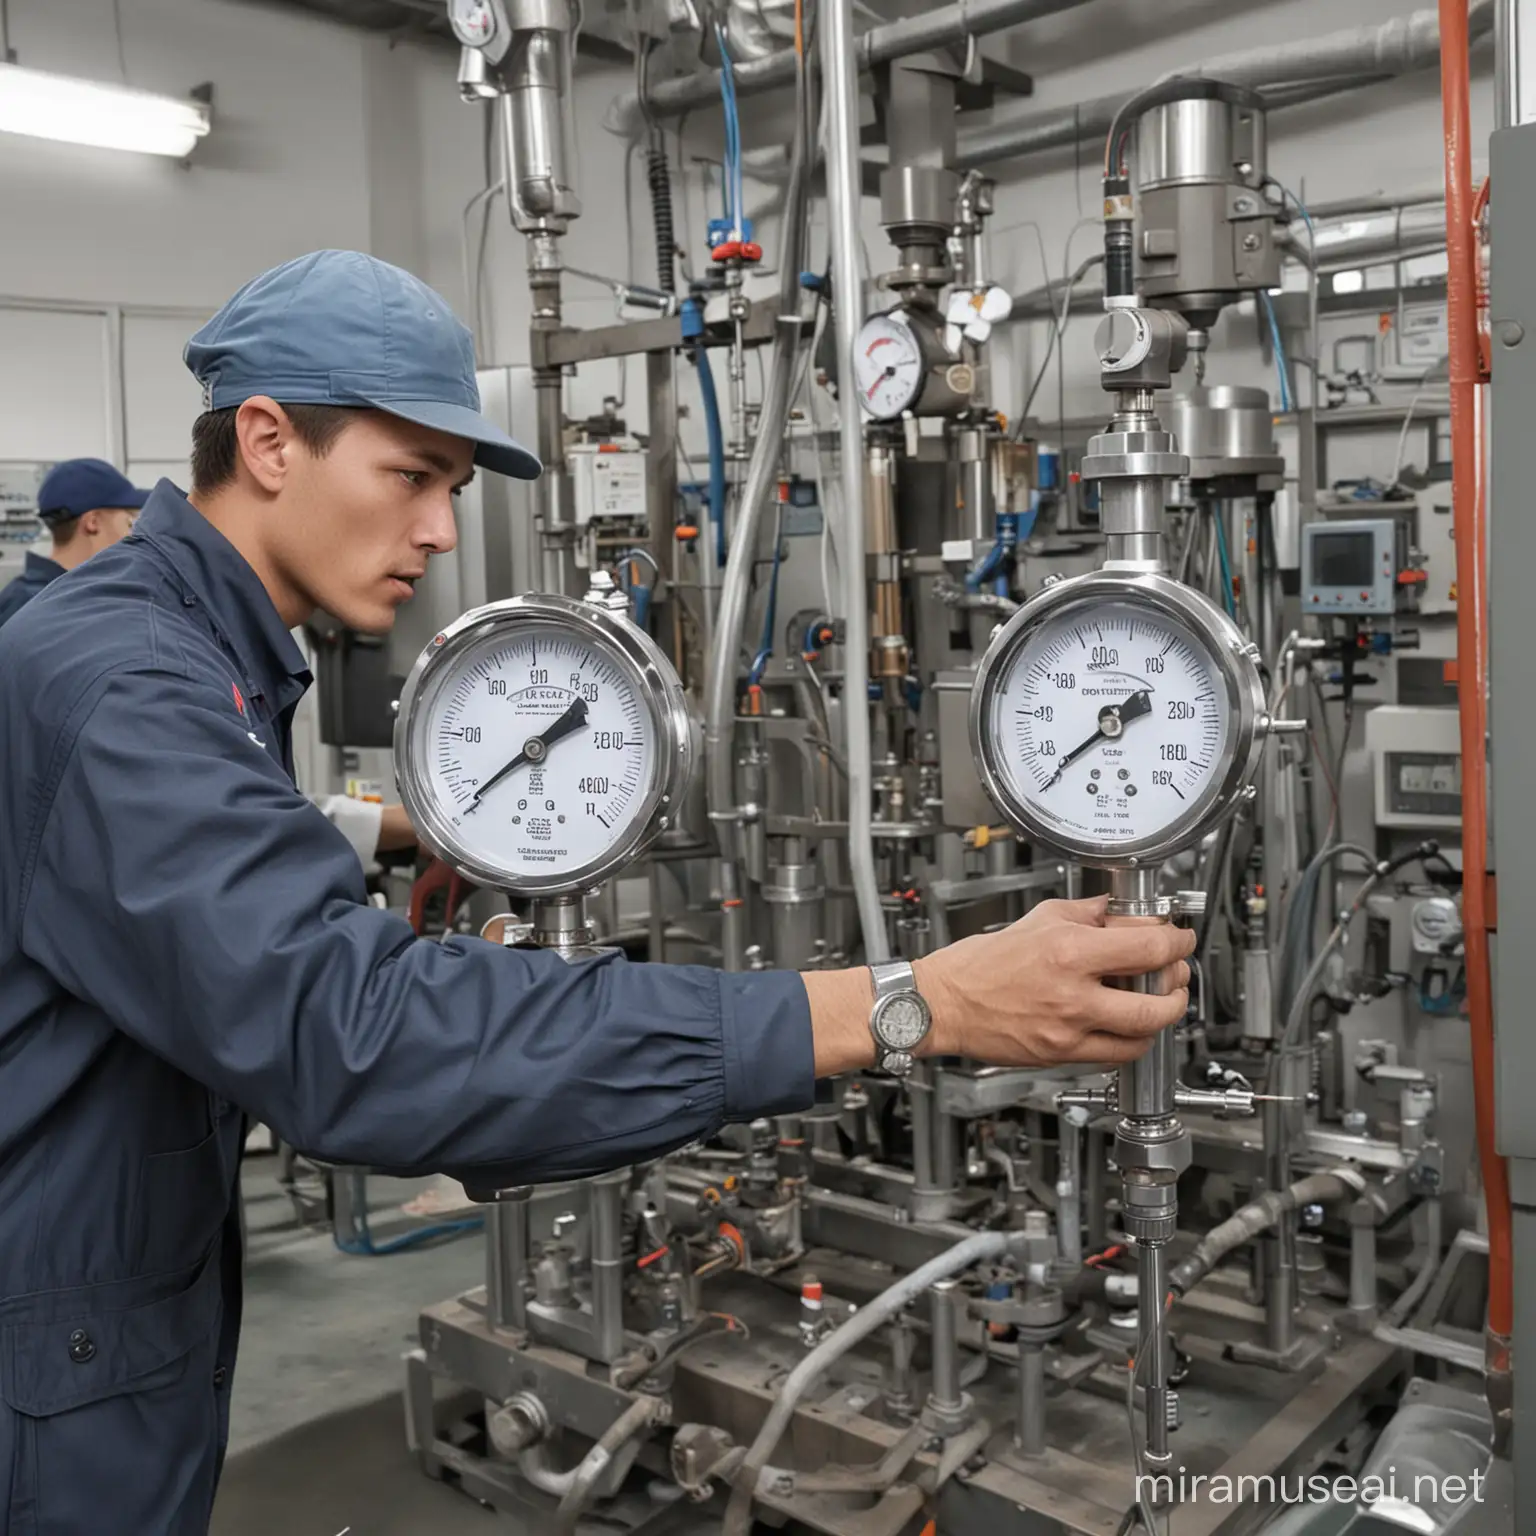 Industrial Workers Producing Control and Measuring Equipment Pressure Gauges Manufacturing